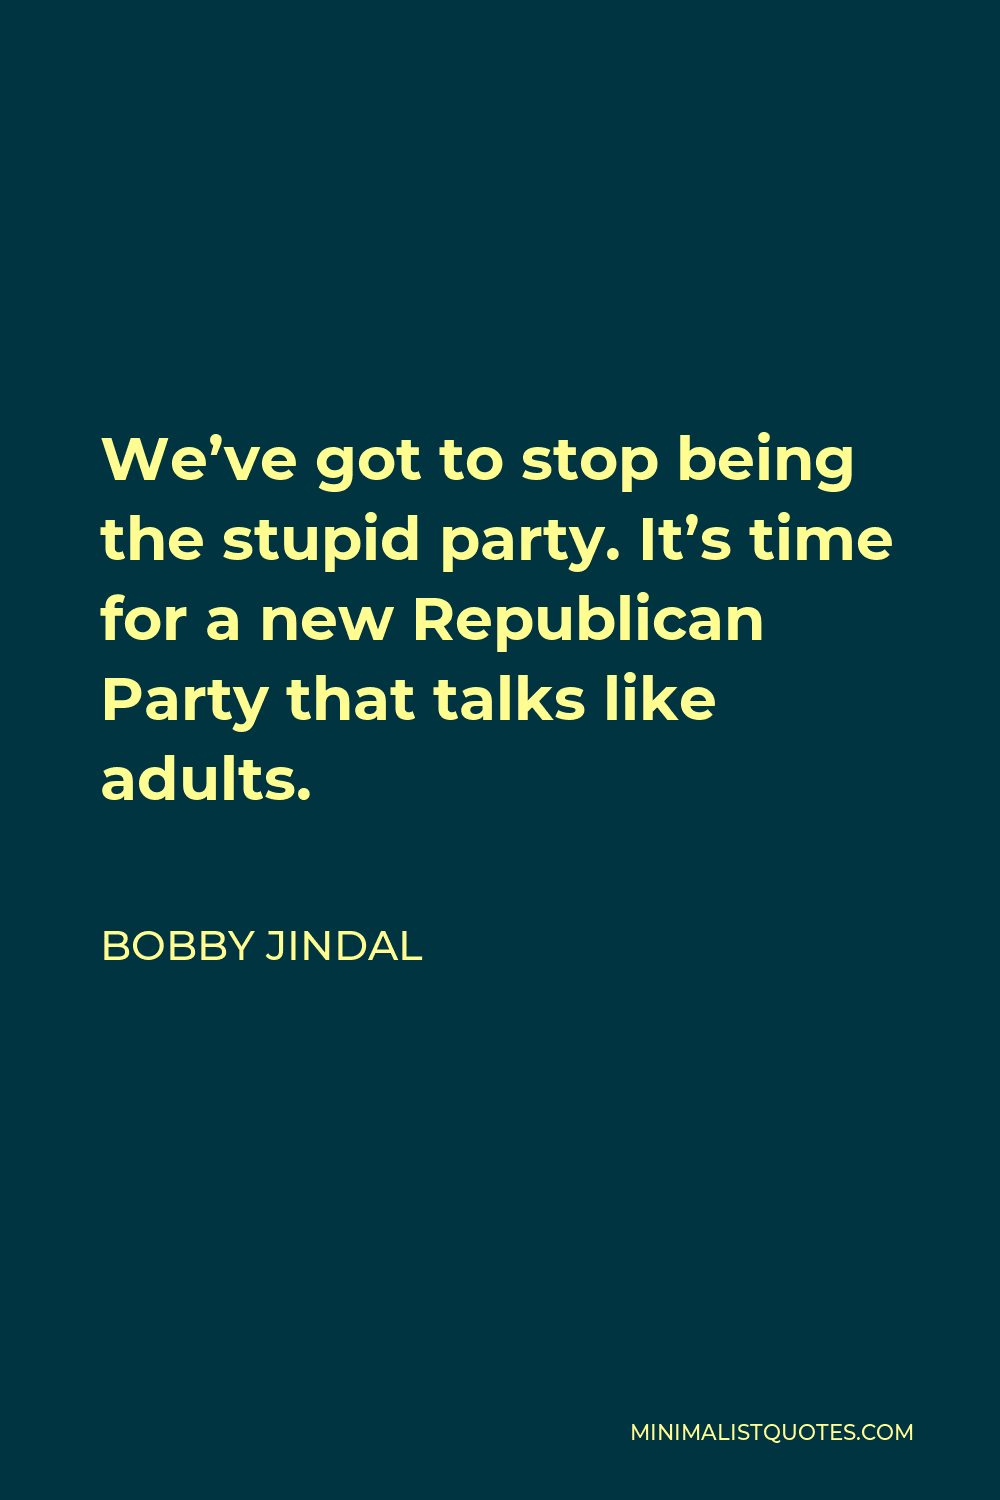 Bobby Jindal Quote - We’ve got to stop being the stupid party. It’s time for a new Republican Party that talks like adults.